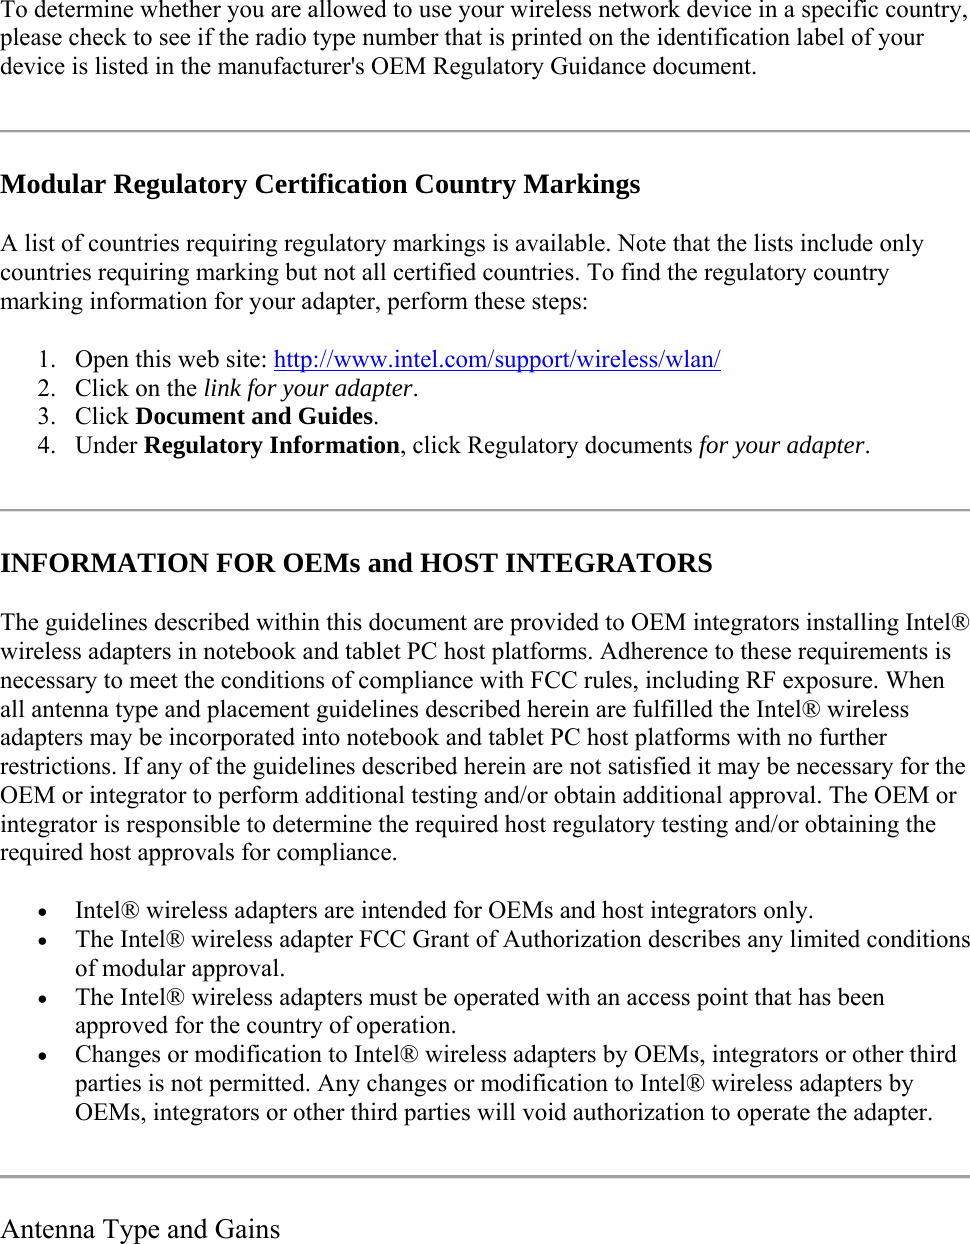 To determine whether you are allowed to use your wireless network device in a specific country, please check to see if the radio type number that is printed on the identification label of your device is listed in the manufacturer&apos;s OEM Regulatory Guidance document.  Modular Regulatory Certification Country Markings A list of countries requiring regulatory markings is available. Note that the lists include only countries requiring marking but not all certified countries. To find the regulatory country marking information for your adapter, perform these steps: 1. Open this web site: http://www.intel.com/support/wireless/wlan/  2. Click on the link for your adapter.  3. Click Document and Guides. 4. Under Regulatory Information, click Regulatory documents for your adapter.   INFORMATION FOR OEMs and HOST INTEGRATORS The guidelines described within this document are provided to OEM integrators installing Intel® wireless adapters in notebook and tablet PC host platforms. Adherence to these requirements is necessary to meet the conditions of compliance with FCC rules, including RF exposure. When all antenna type and placement guidelines described herein are fulfilled the Intel® wireless adapters may be incorporated into notebook and tablet PC host platforms with no further restrictions. If any of the guidelines described herein are not satisfied it may be necessary for the OEM or integrator to perform additional testing and/or obtain additional approval. The OEM or integrator is responsible to determine the required host regulatory testing and/or obtaining the required host approvals for compliance.   Intel® wireless adapters are intended for OEMs and host integrators only.   The Intel® wireless adapter FCC Grant of Authorization describes any limited conditions of modular approval.   The Intel® wireless adapters must be operated with an access point that has been approved for the country of operation.  Changes or modification to Intel® wireless adapters by OEMs, integrators or other third parties is not permitted. Any changes or modification to Intel® wireless adapters by OEMs, integrators or other third parties will void authorization to operate the adapter.   Antenna Type and Gains 